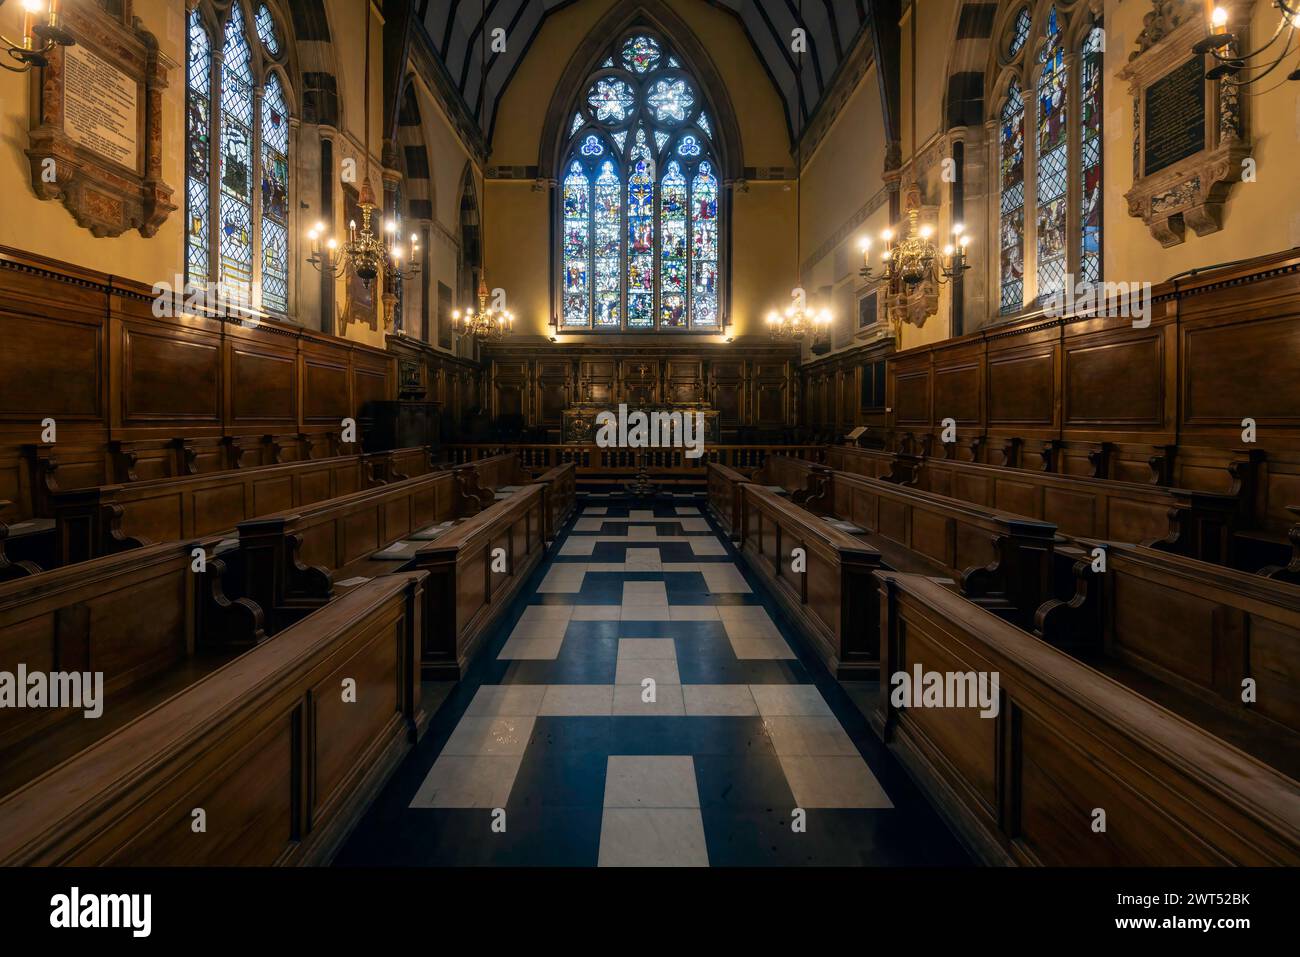 Nave and Choir Stalls, Balliol Chapel, Balliol College, Oxford, Angleterre, ROYAUME-UNI Banque D'Images